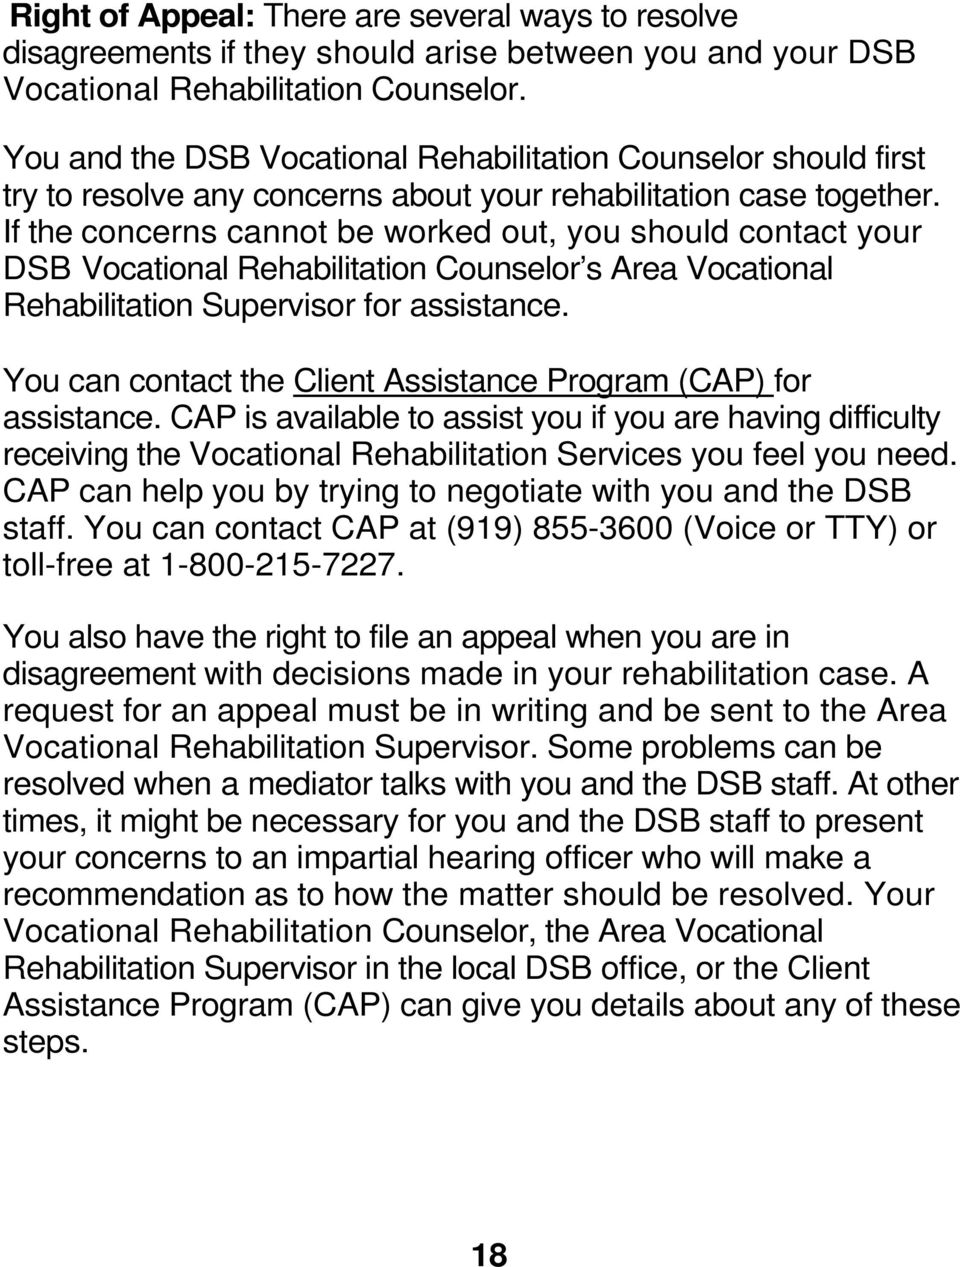 If the concerns cannot be worked out, you should contact your DSB Vocational Rehabilitation Counselor s Area Vocational Rehabilitation Supervisor for assistance.